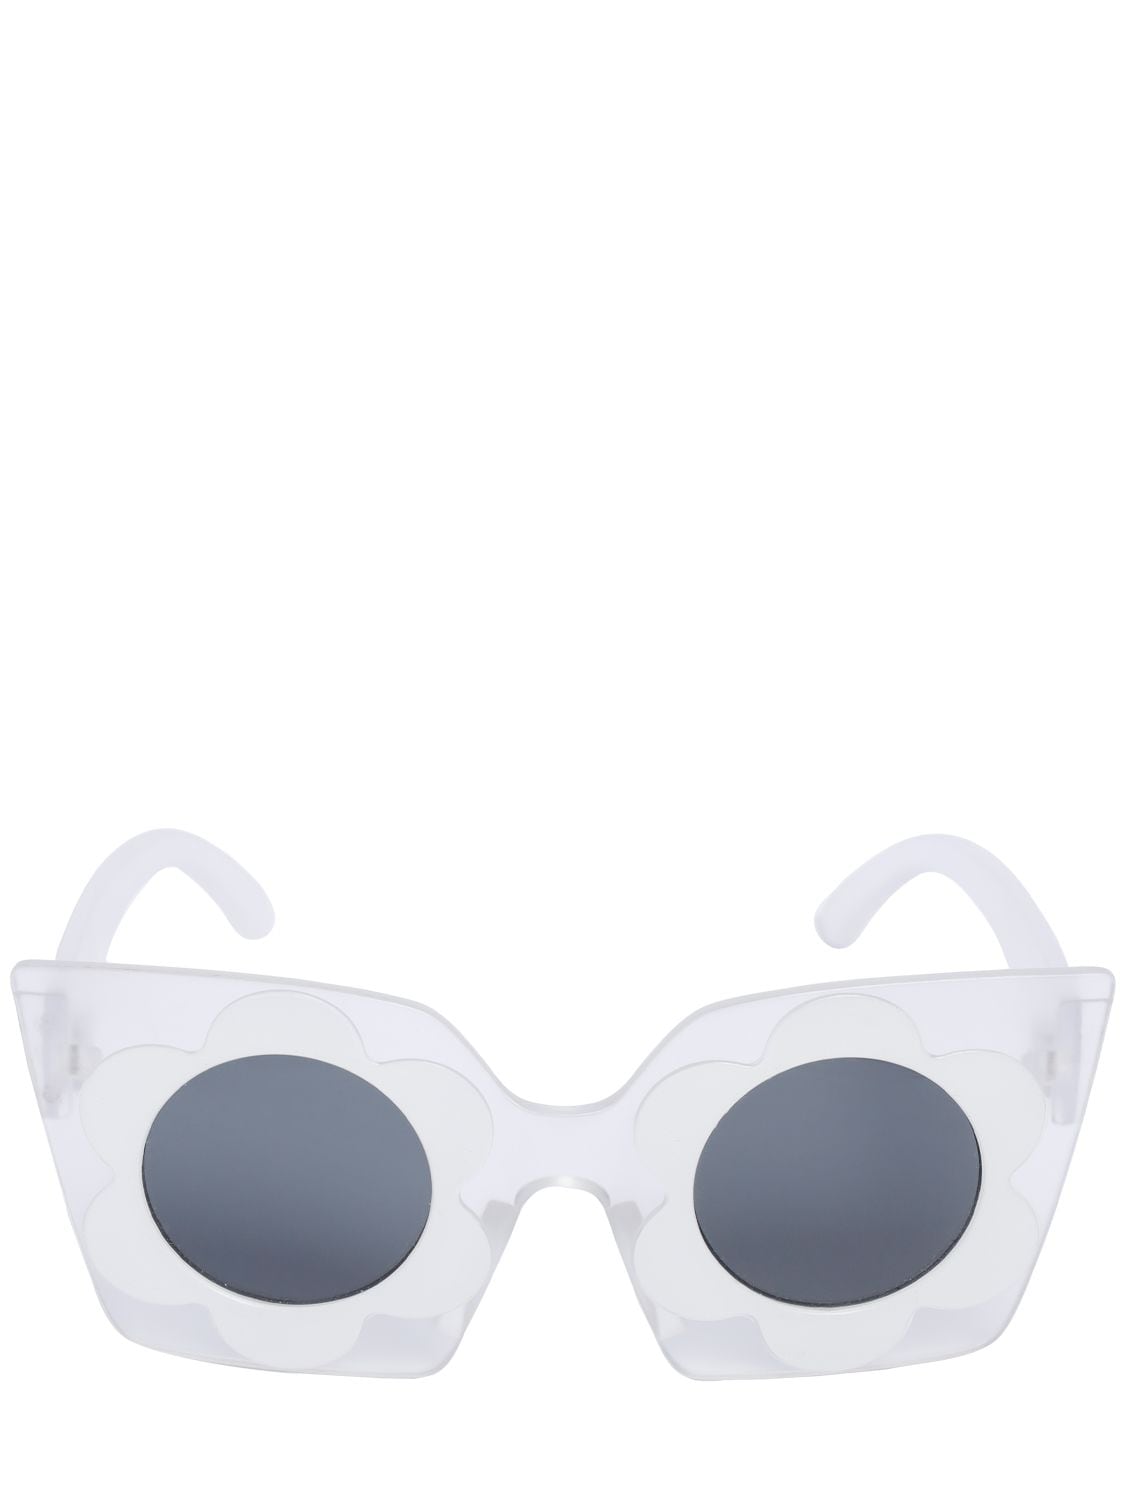 Image of Squared Polycarbonate Sunglasses